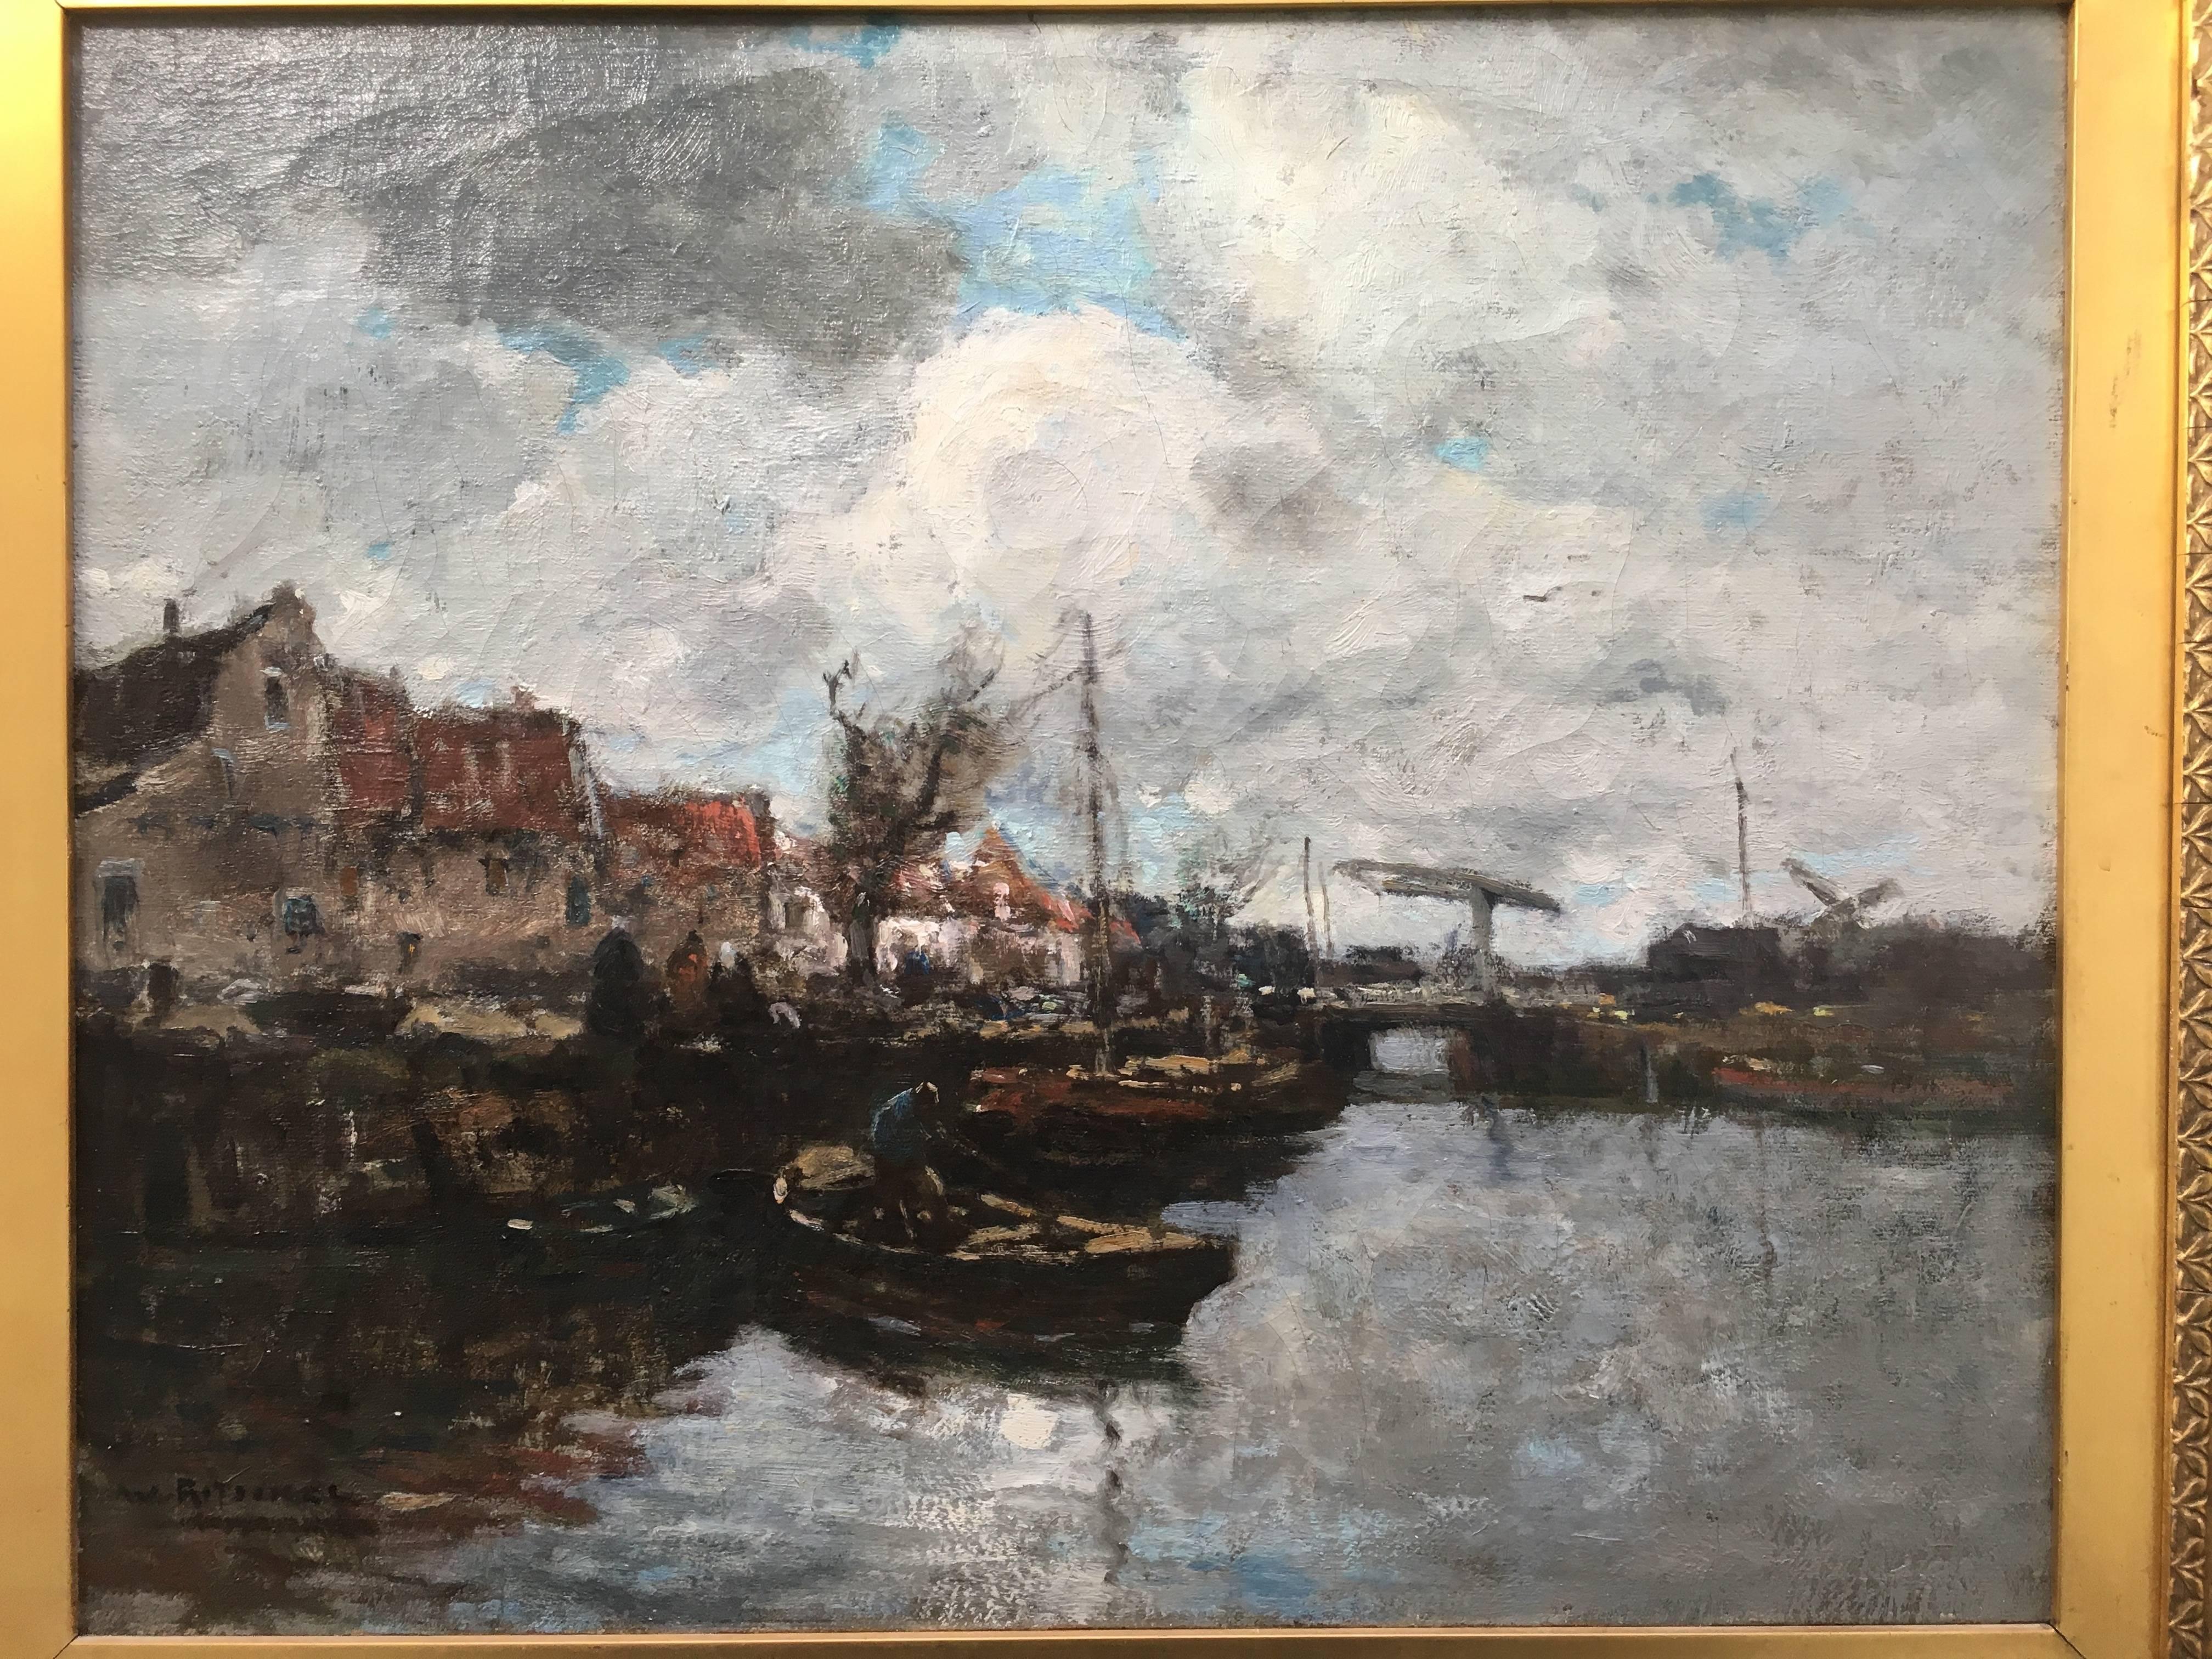 Boats in the Harbor - Painting by William Ritschel